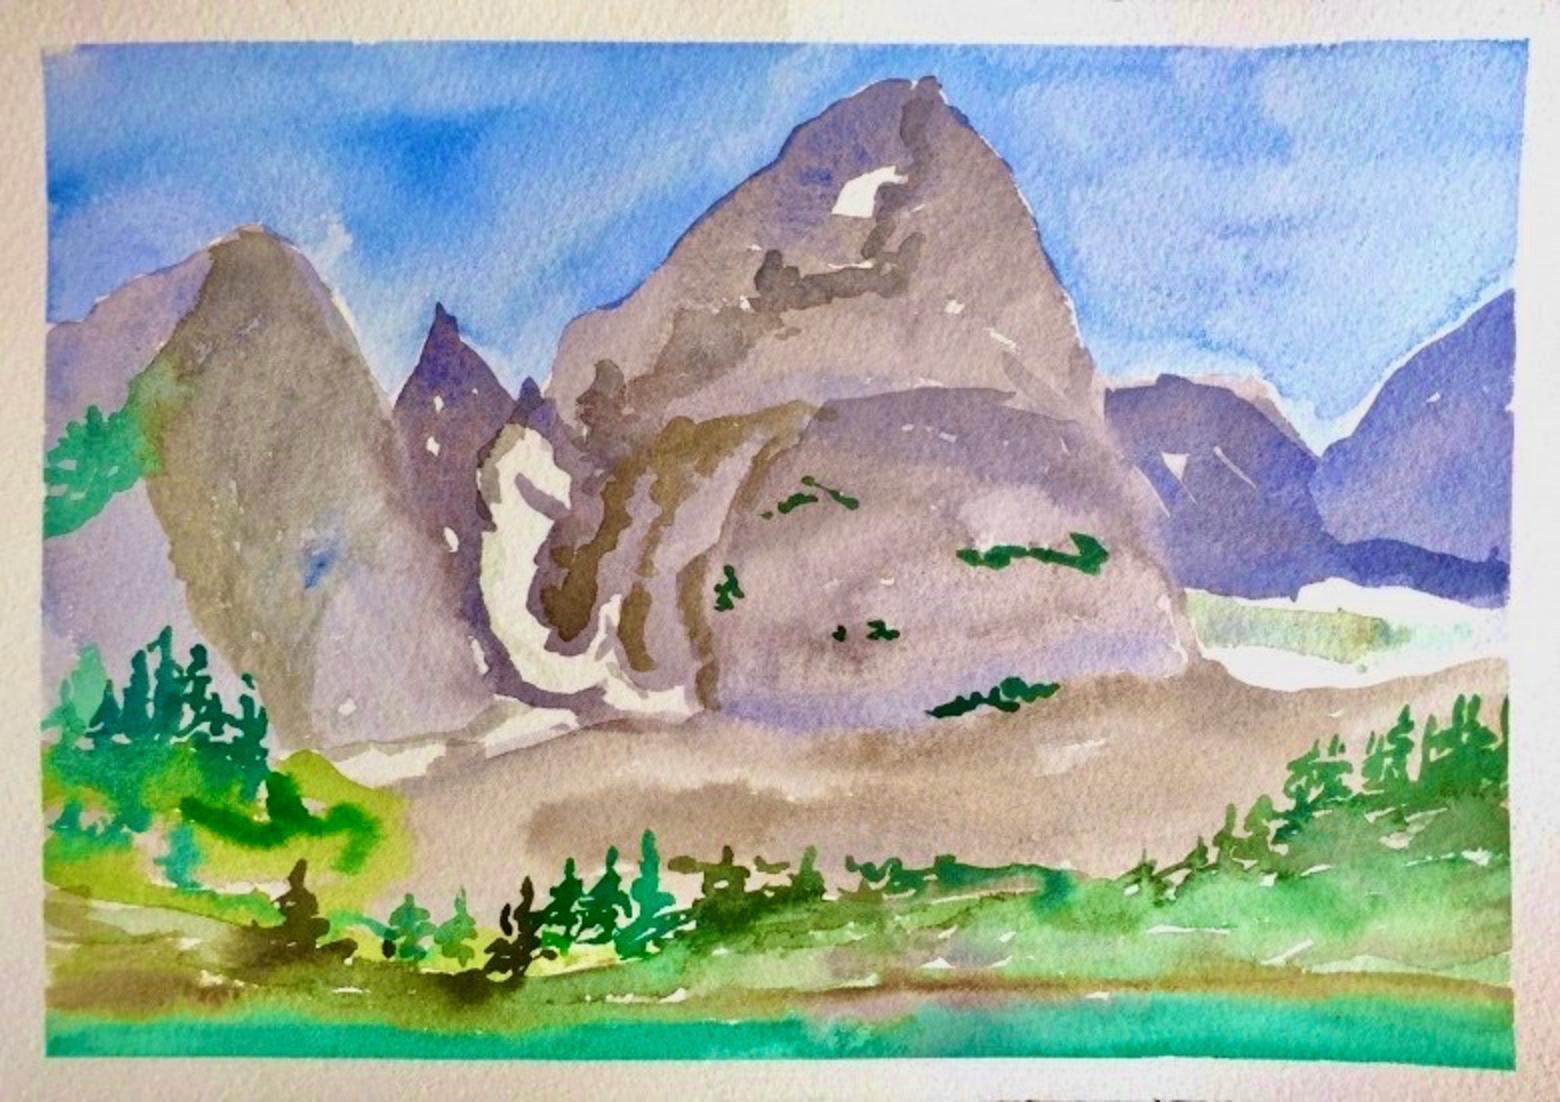 A watercolor painting of Delta Lake by Sue Cedarholm. Used with permission. To see more of her work go to www.watercolordiary.com